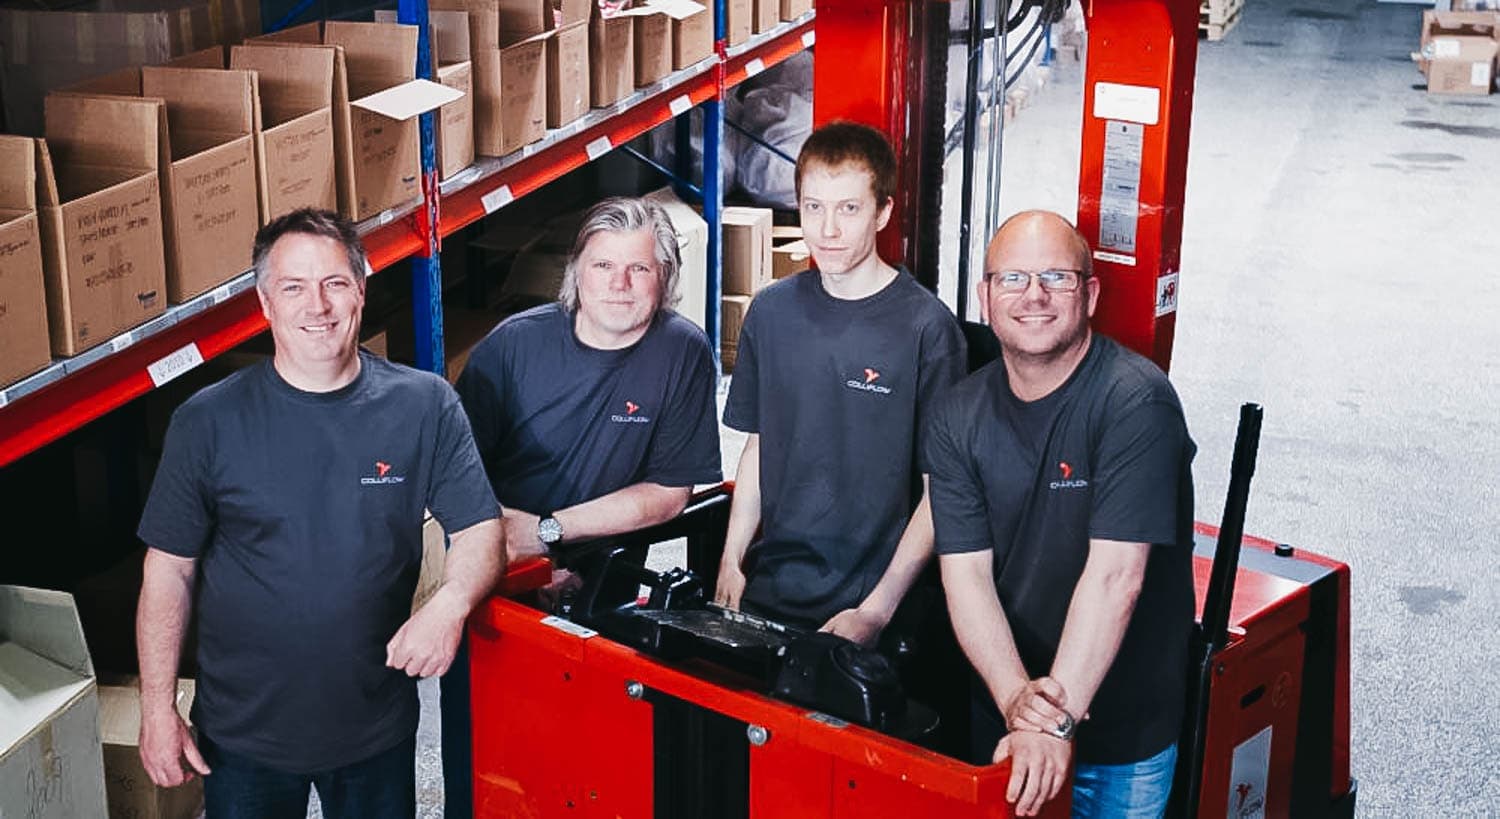 Four Colliflow employees stand in the warehouse and smile at the camera.